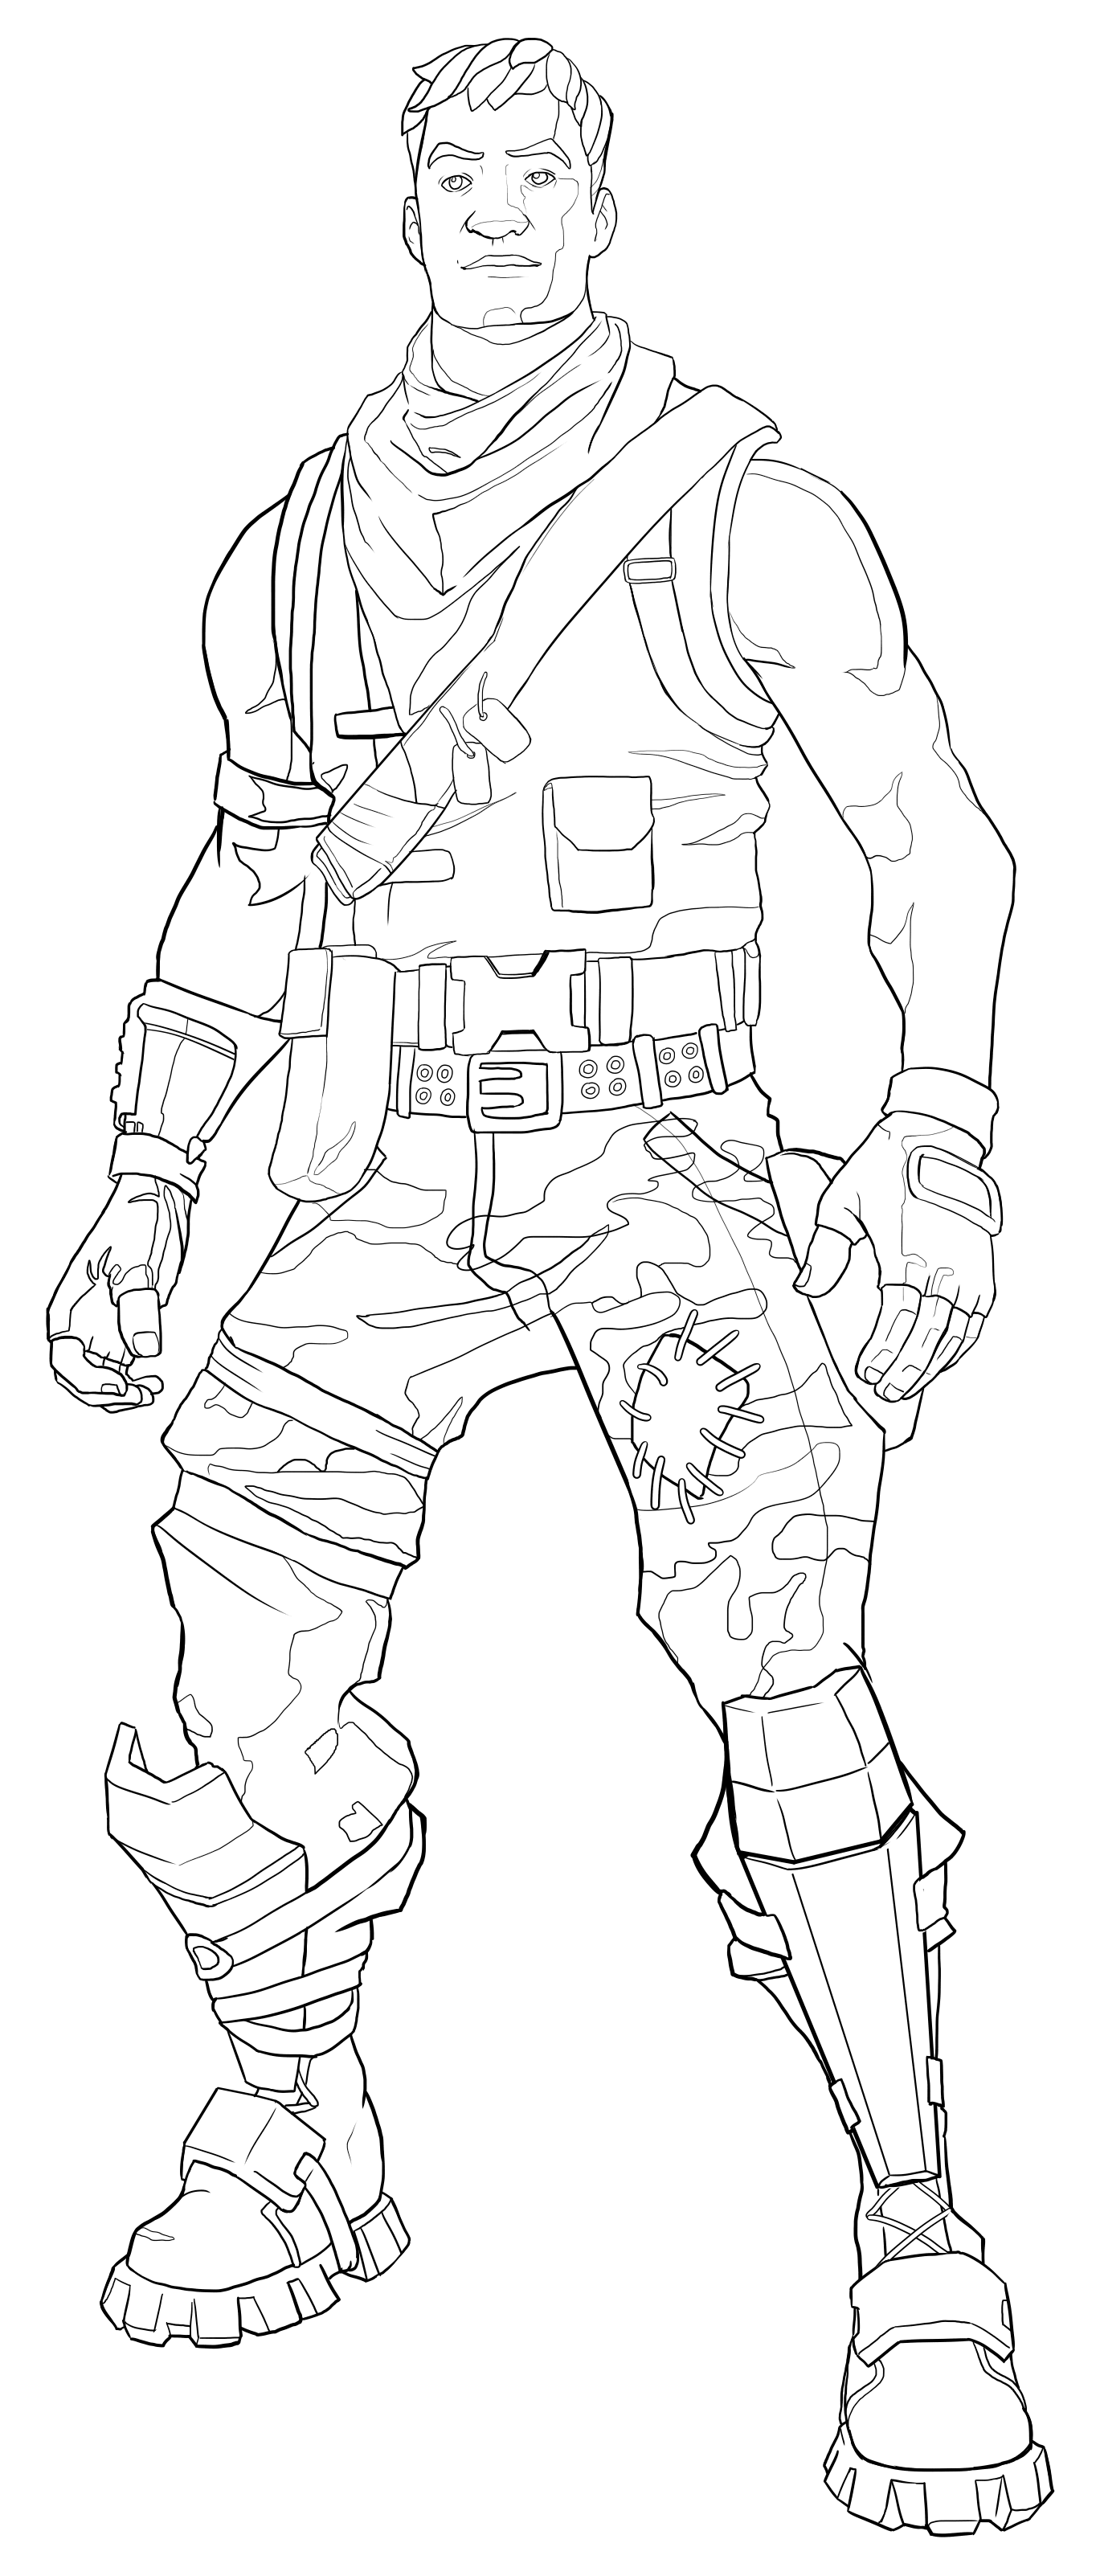 Fortnite Default Skin Coloring Page Male Coloring Page